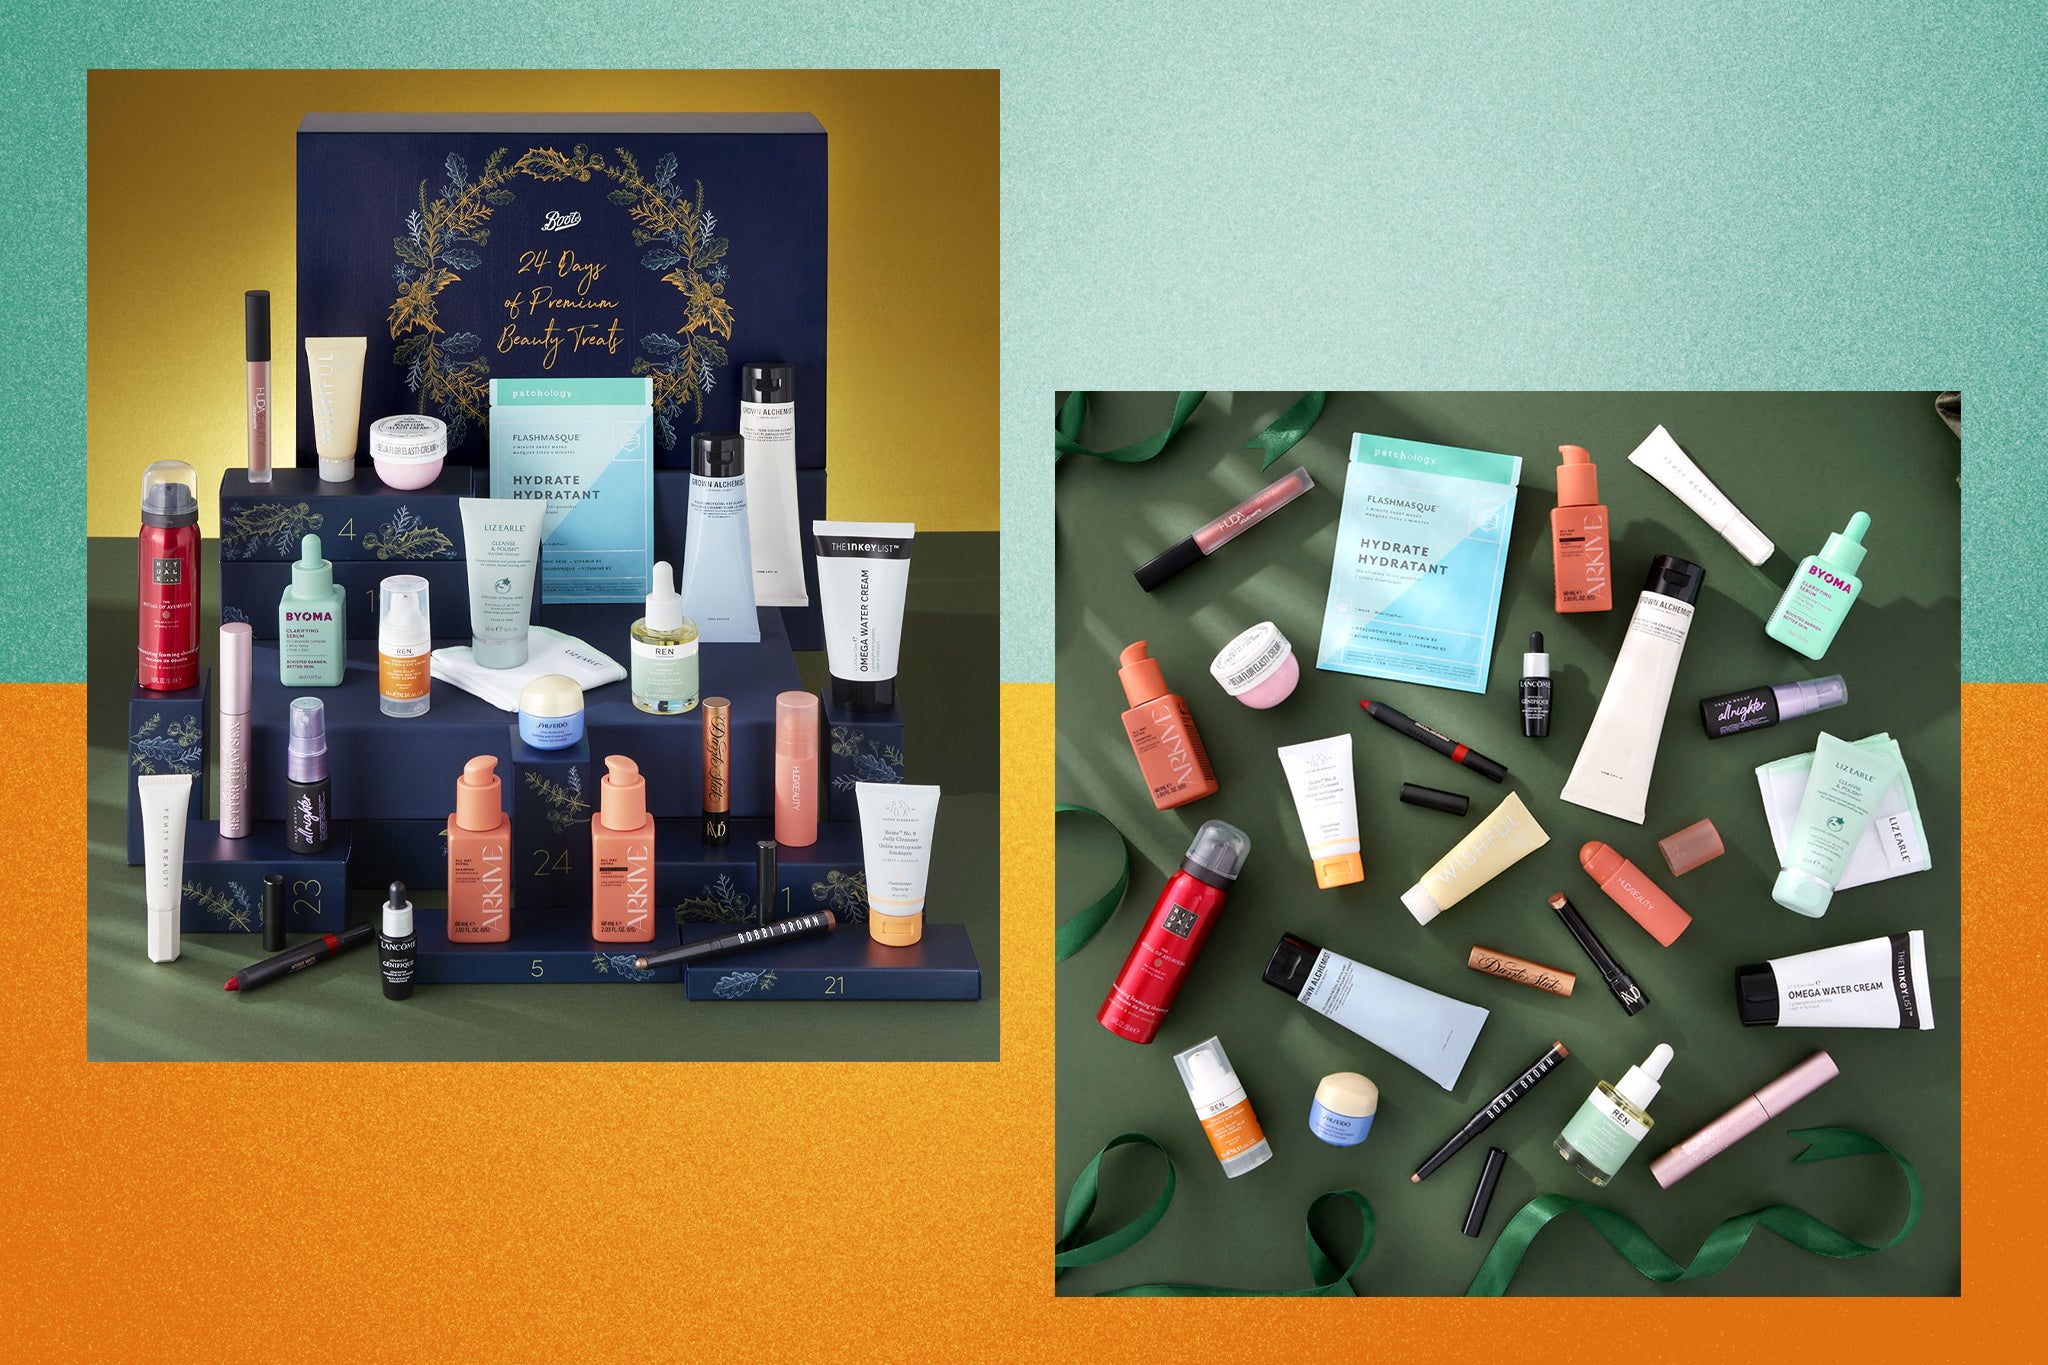 Products from luxe beauty brands such as Lancôme, Liz Earle, Bobbi Brown and more are concealed inside